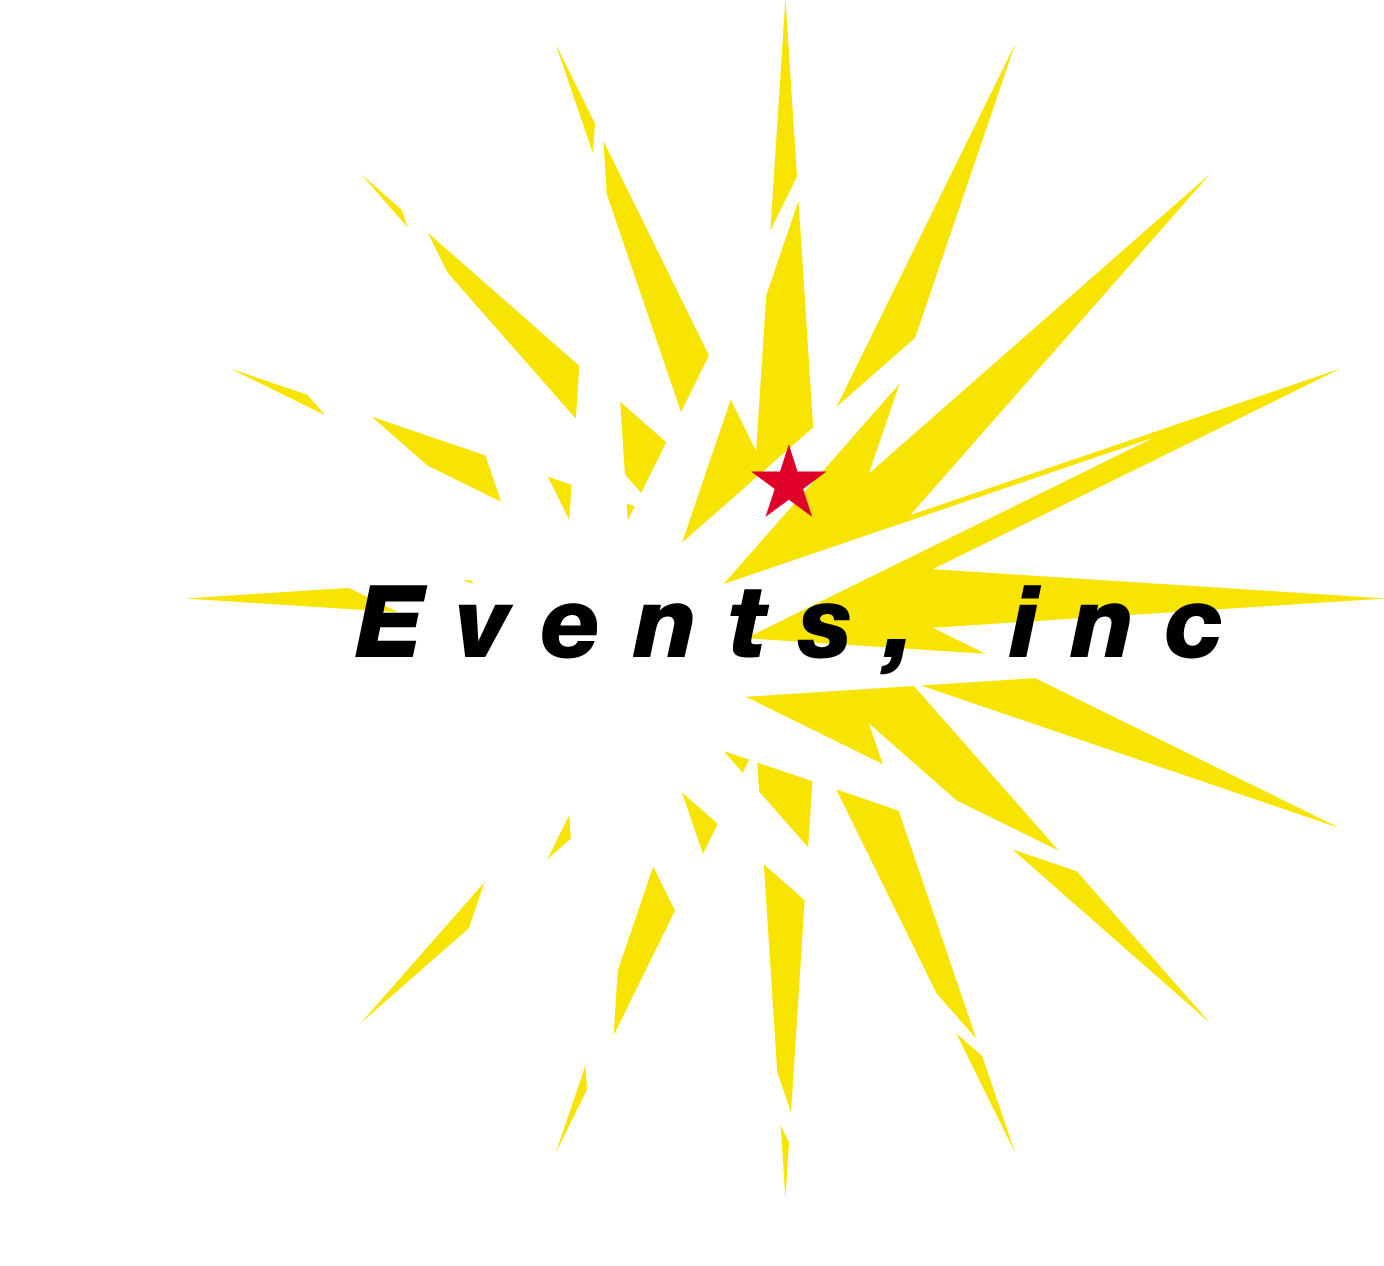 Events inc